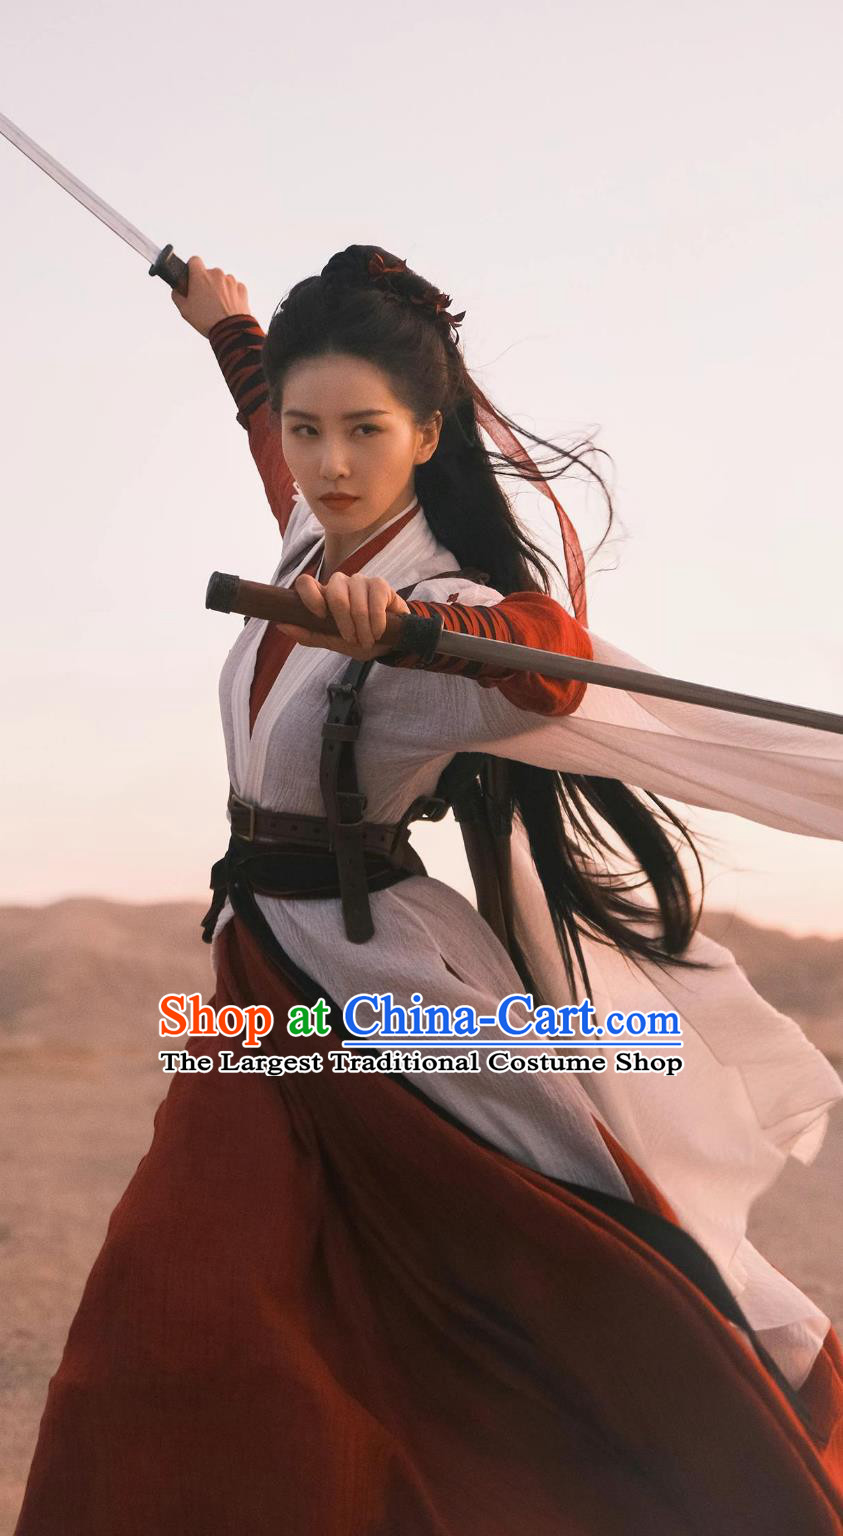 2023 TV Series A Journey To Love Swordswoman Ren Ru Yi Costume Ancient Chinese Female Assassin Clothing Wuxia Kungfu Garment